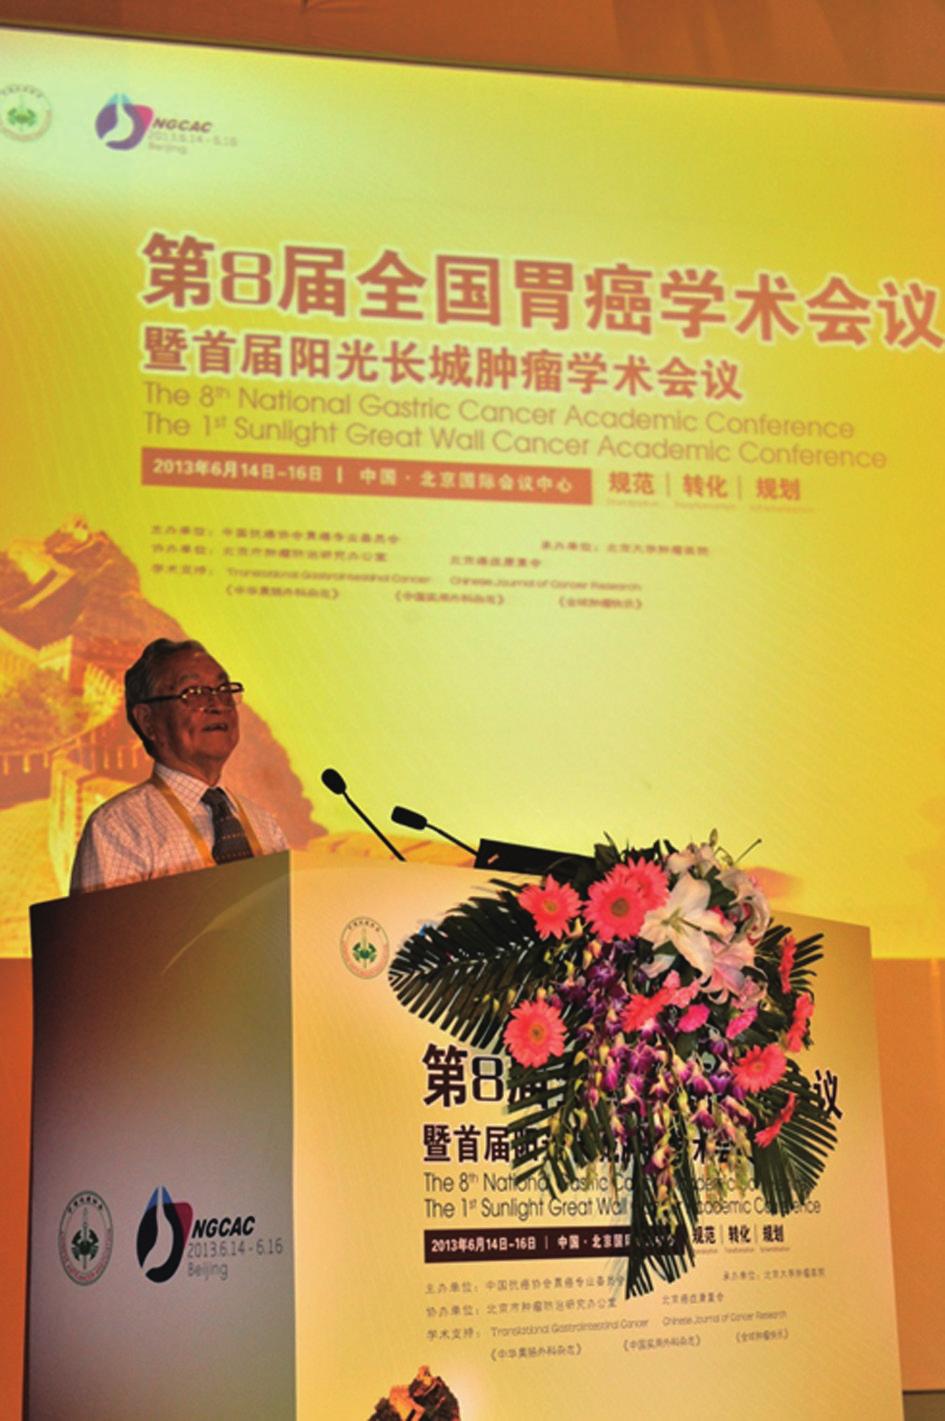 Yan Sun, MD, academician of Chinese Cancer Committee, Chinese Anti-Cancer Association (CACA), Academy of Engineering (CAE), was the honorary chairman of the was the chairman of the 8th National